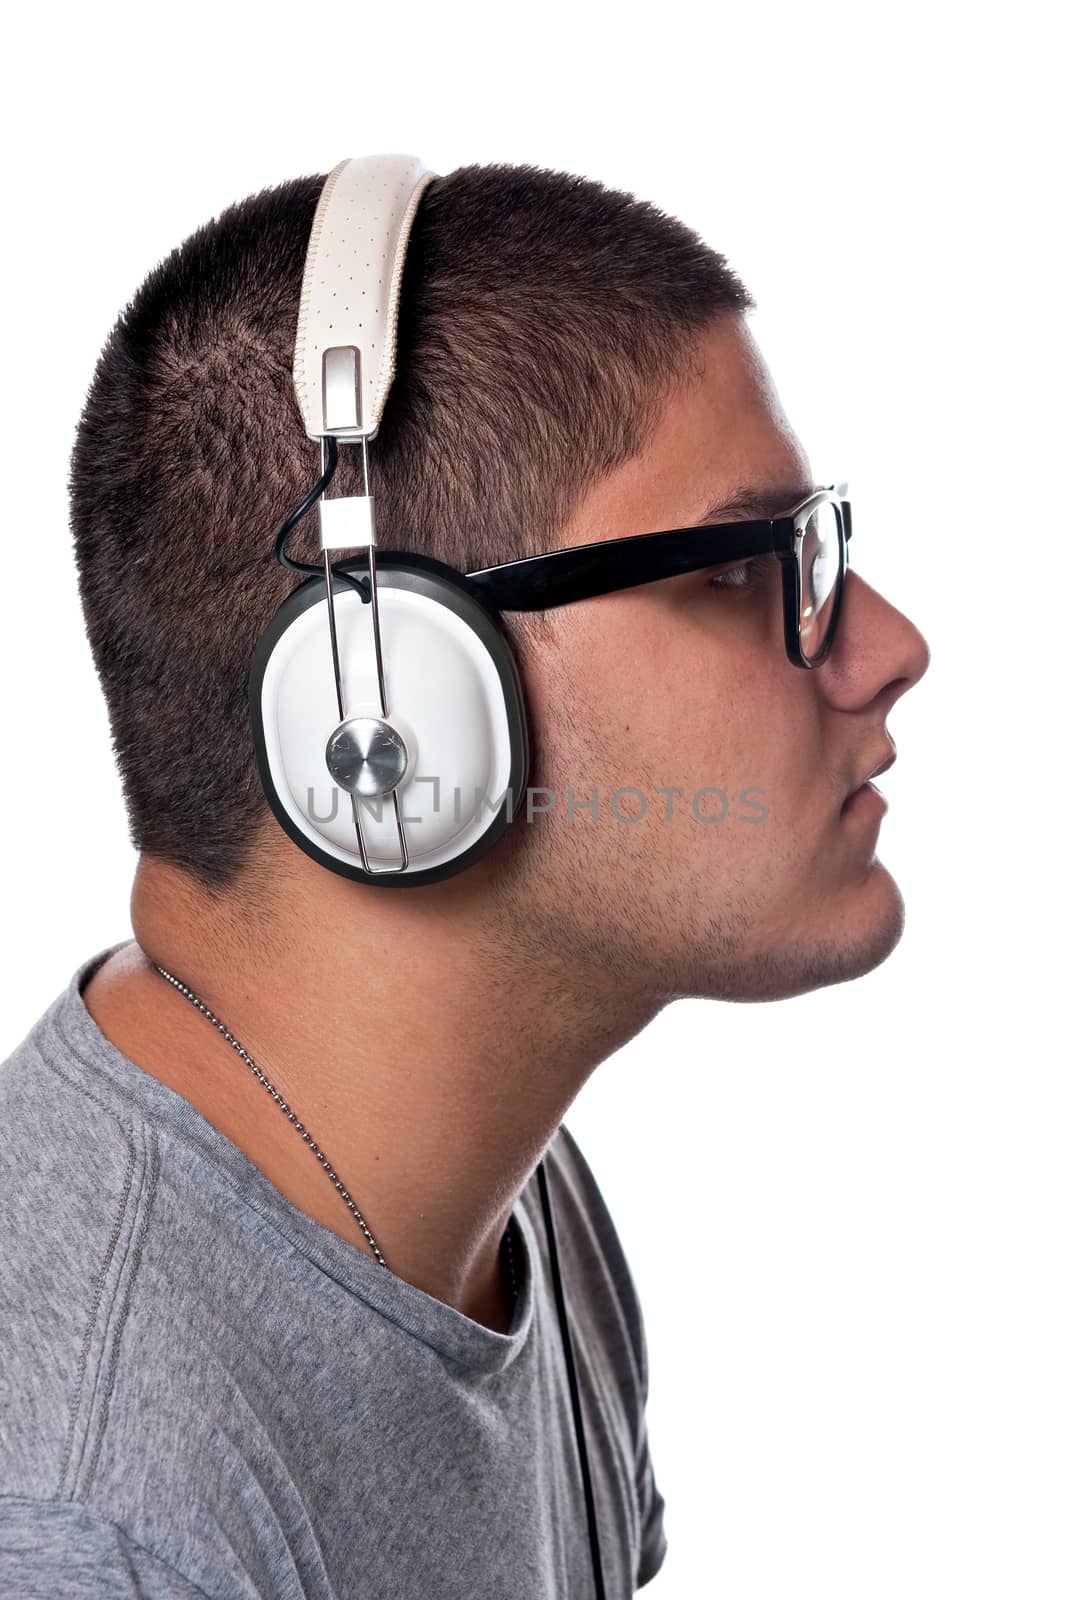 A young man listens to music with a set of head phones over a white background.